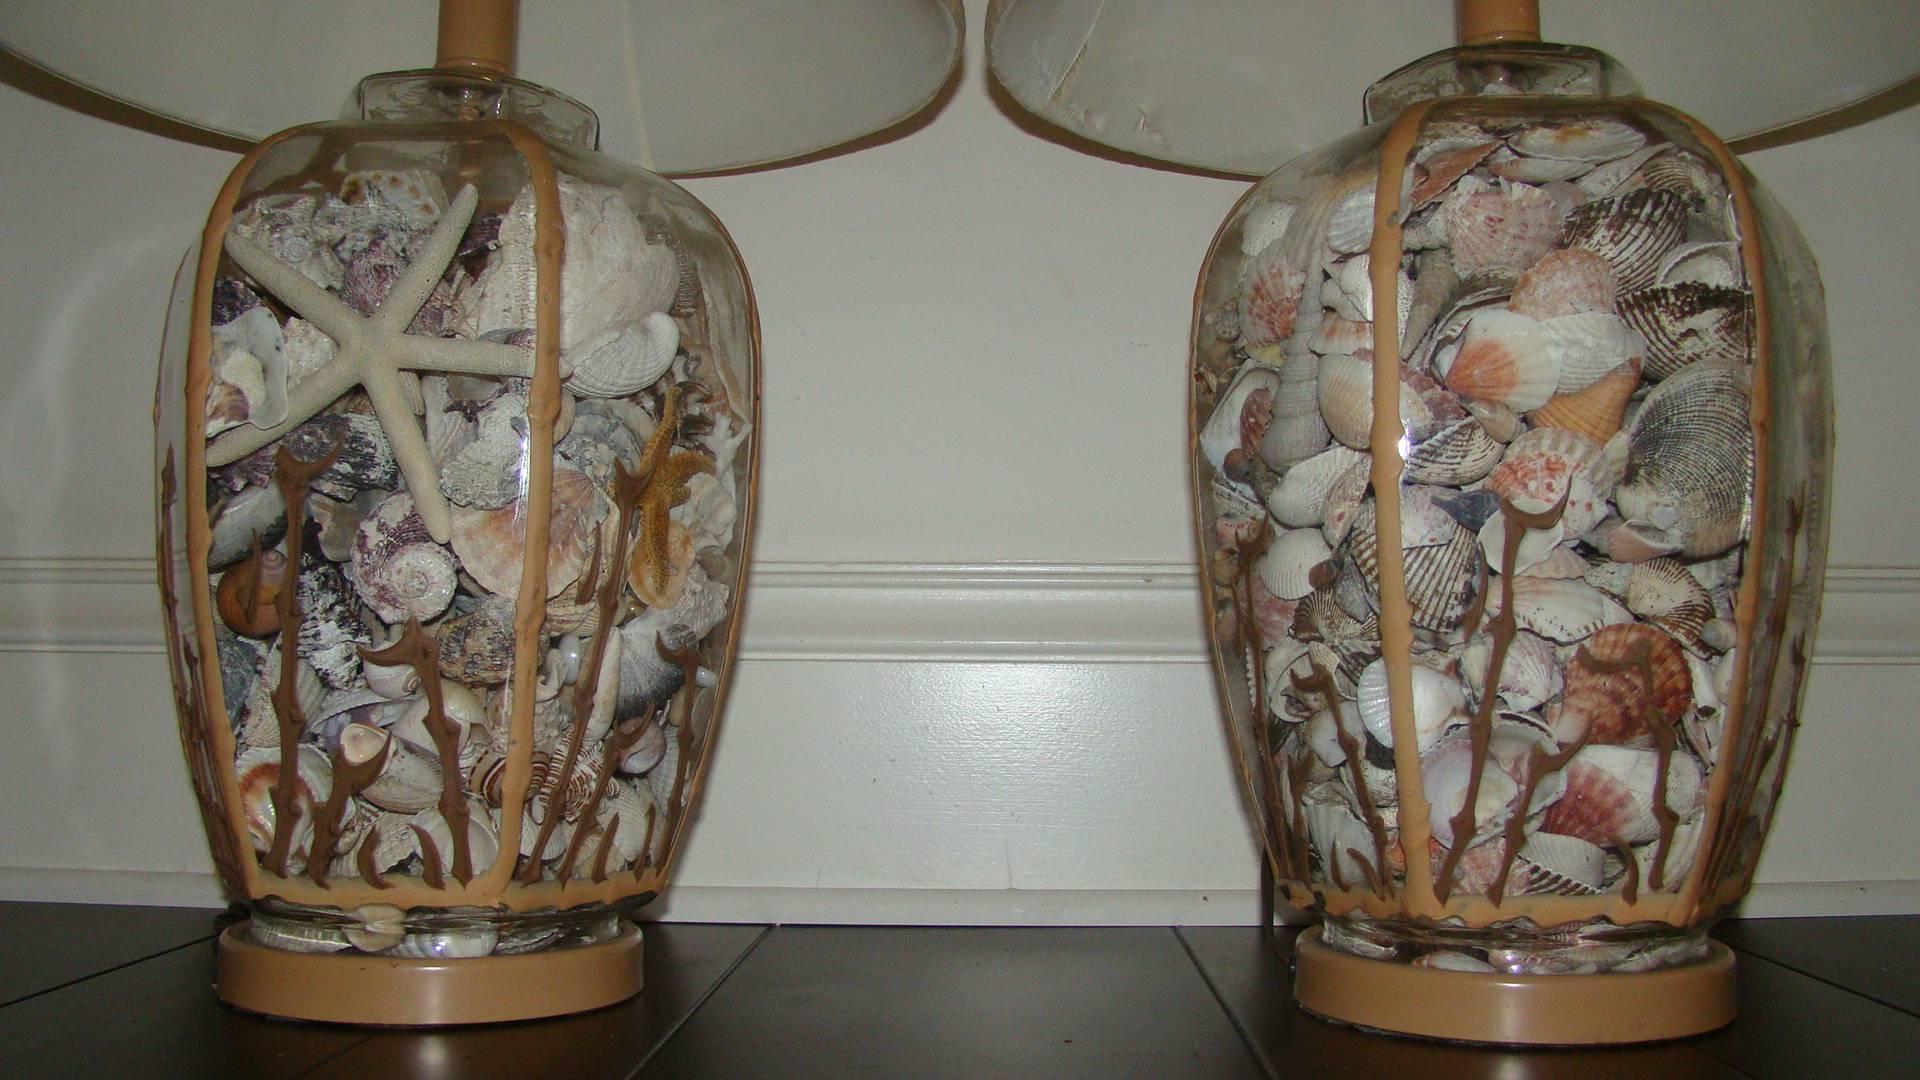 Pair of sea shell filled glass table lamps. Comprised of tons of sea shell and sea specimens sealed in a sculptural glass frame with decorated terracotta color details. Perfect for a beach house. They are rewired and ready to use complete with